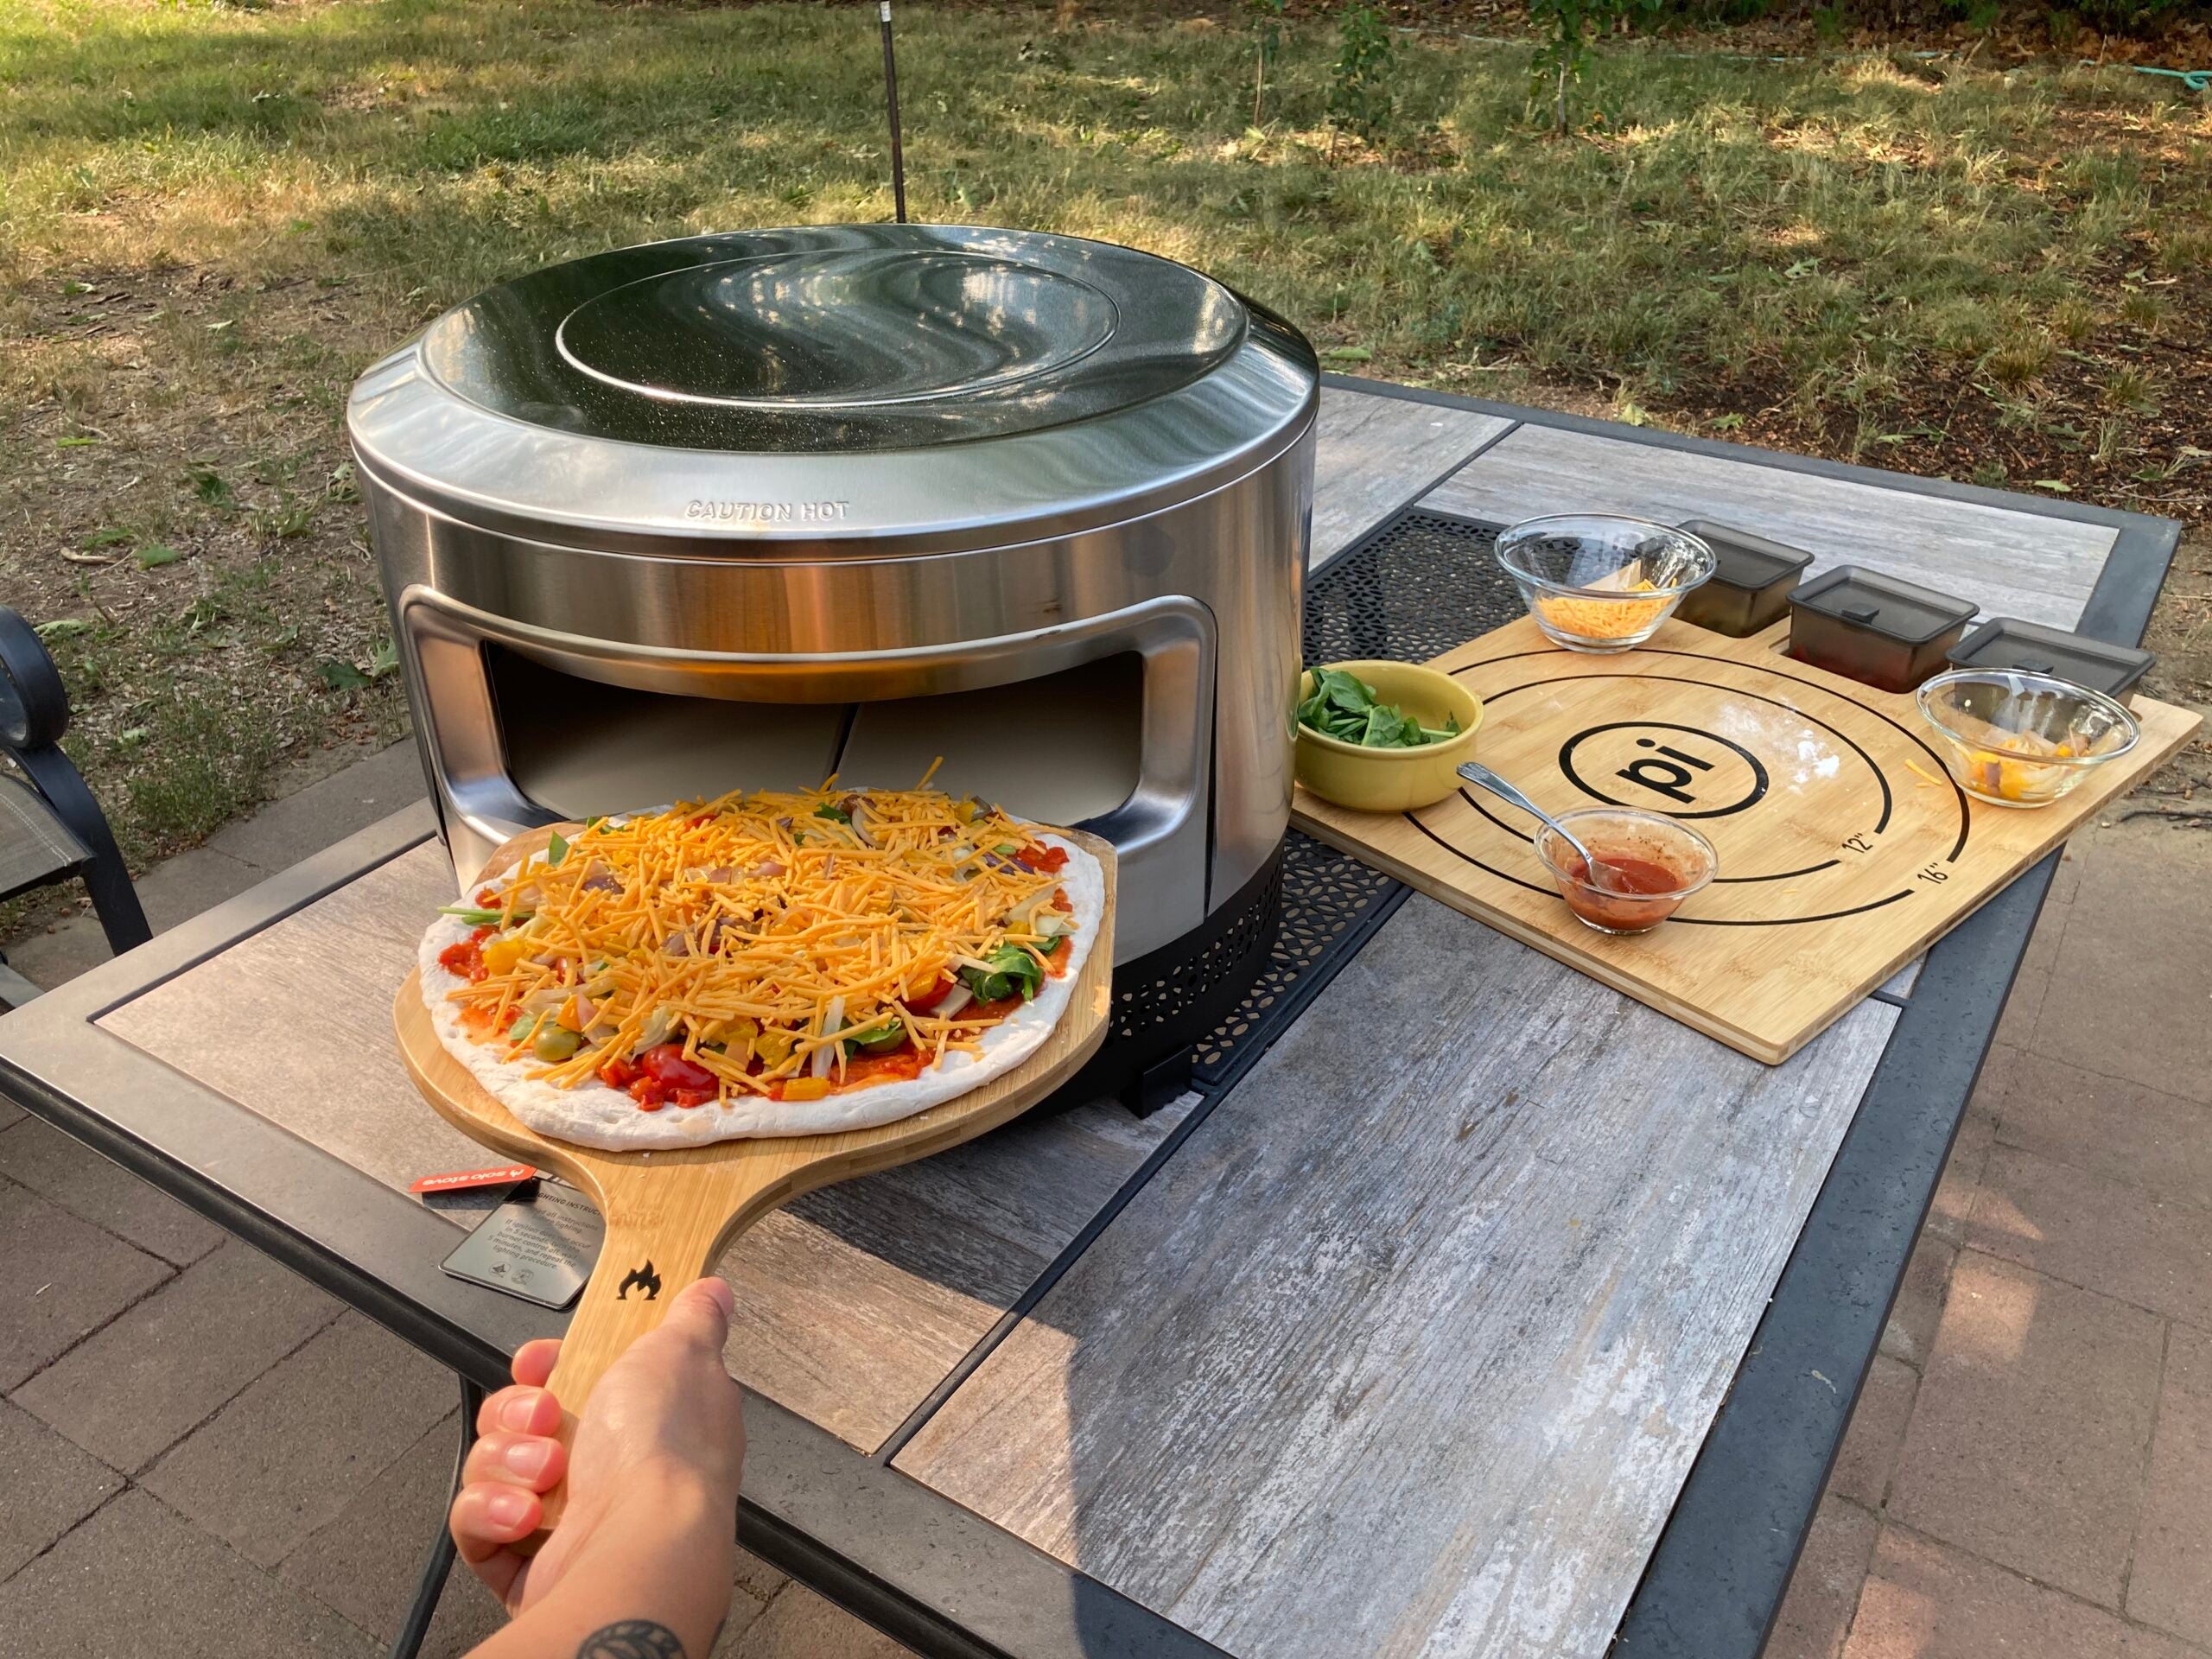 Solo Stove Pi Review: Cooking Pizza and Cast Iron With Ease